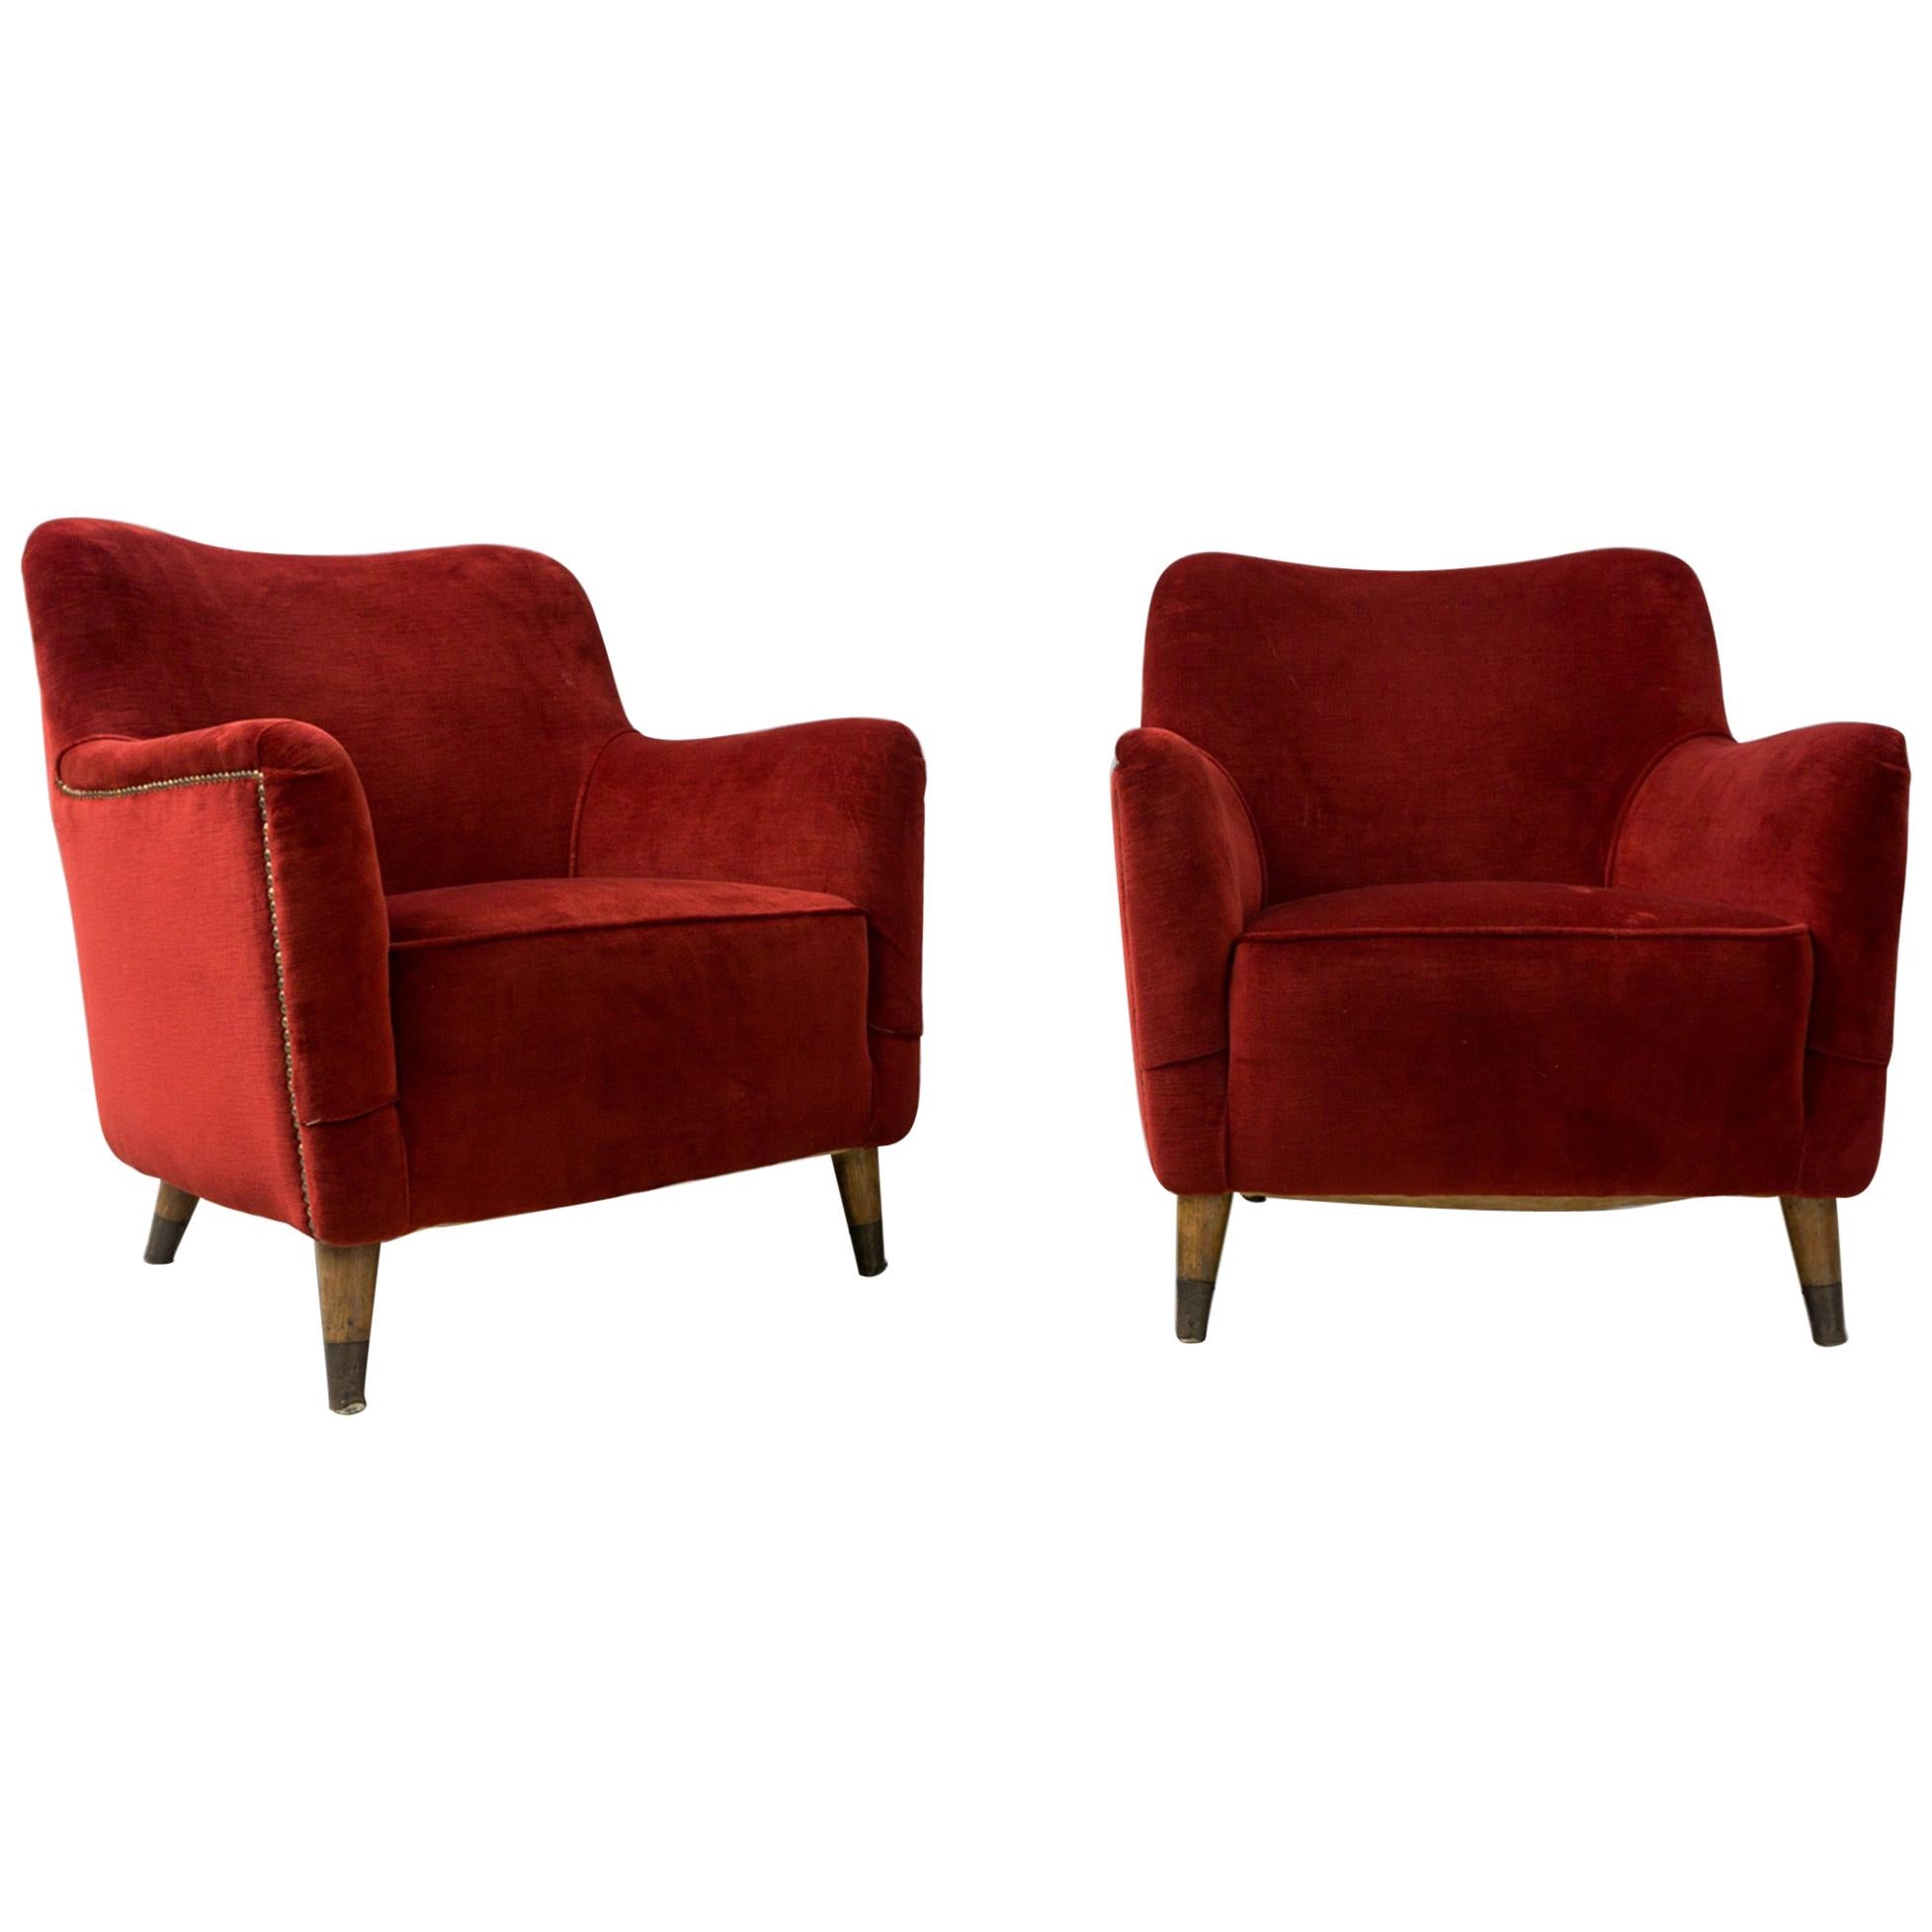 Pair of Armchairs, Red Velvet, by Gio Ponti, 1949